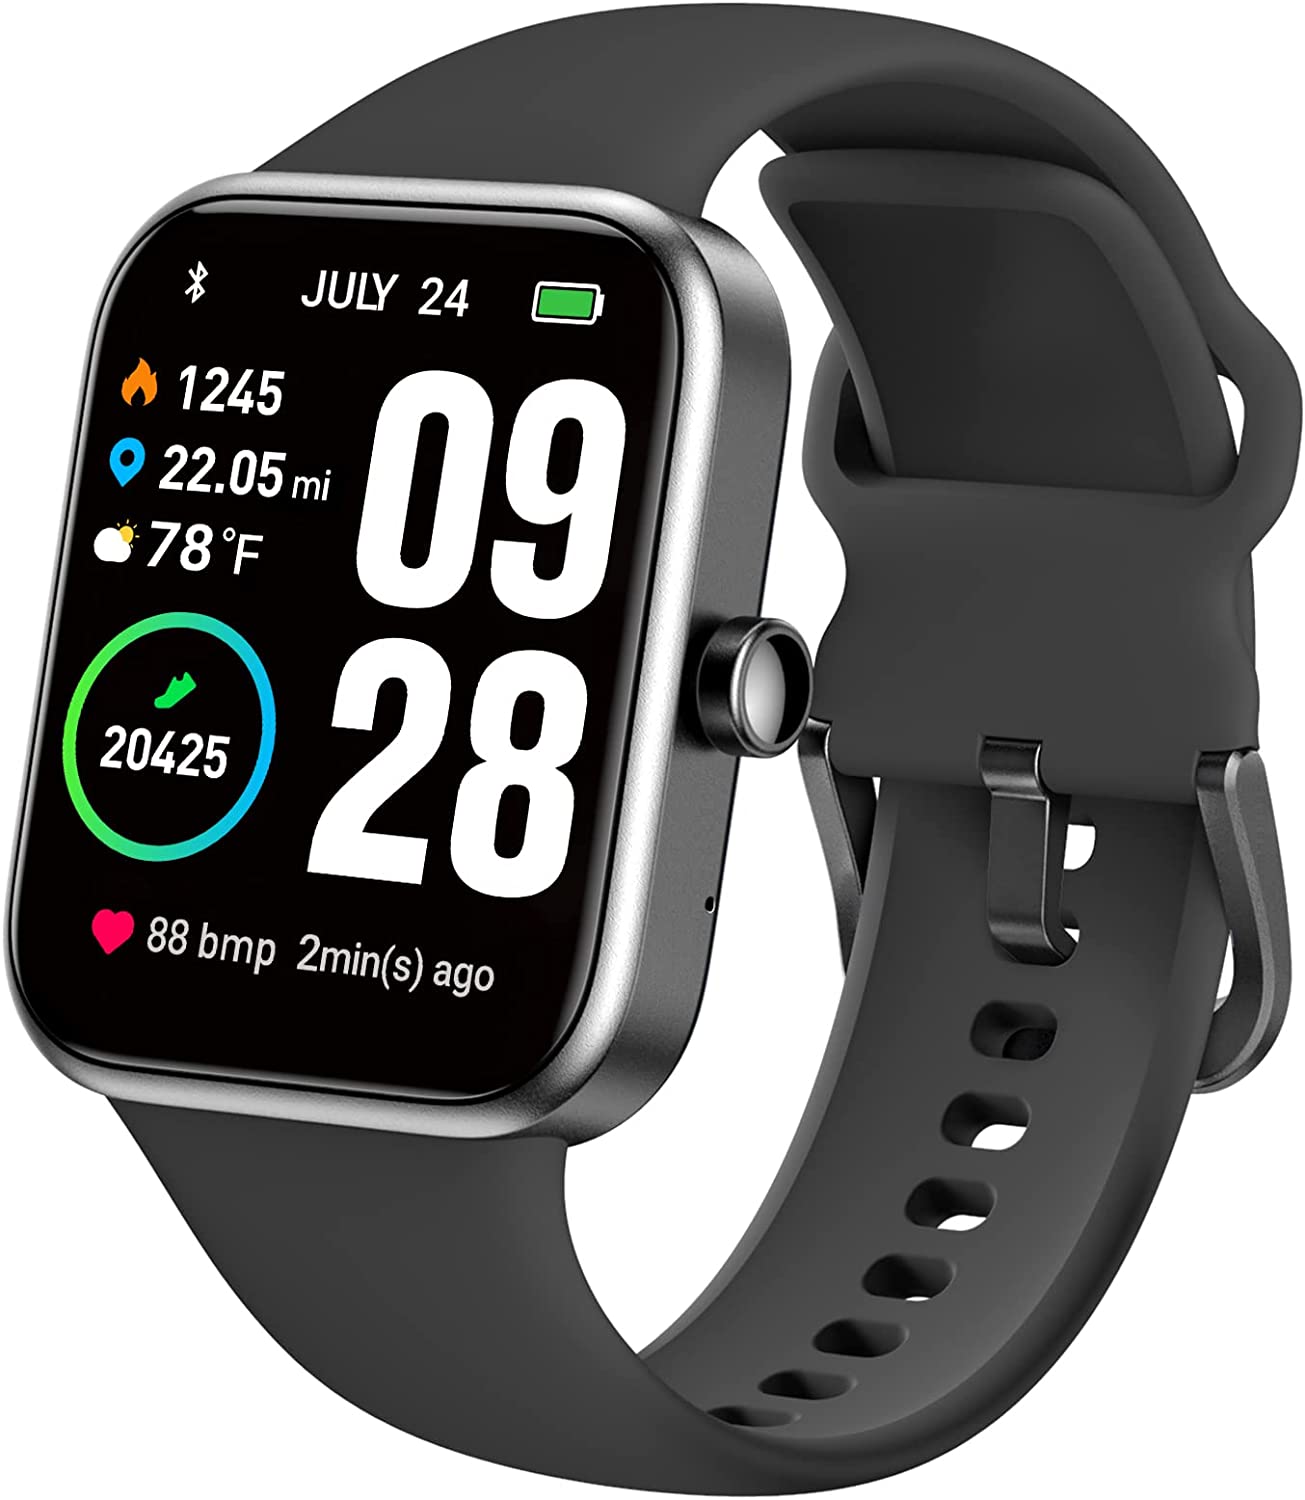 TOZO S2 44mm Smart Watch – Just $33.98 at Amazon